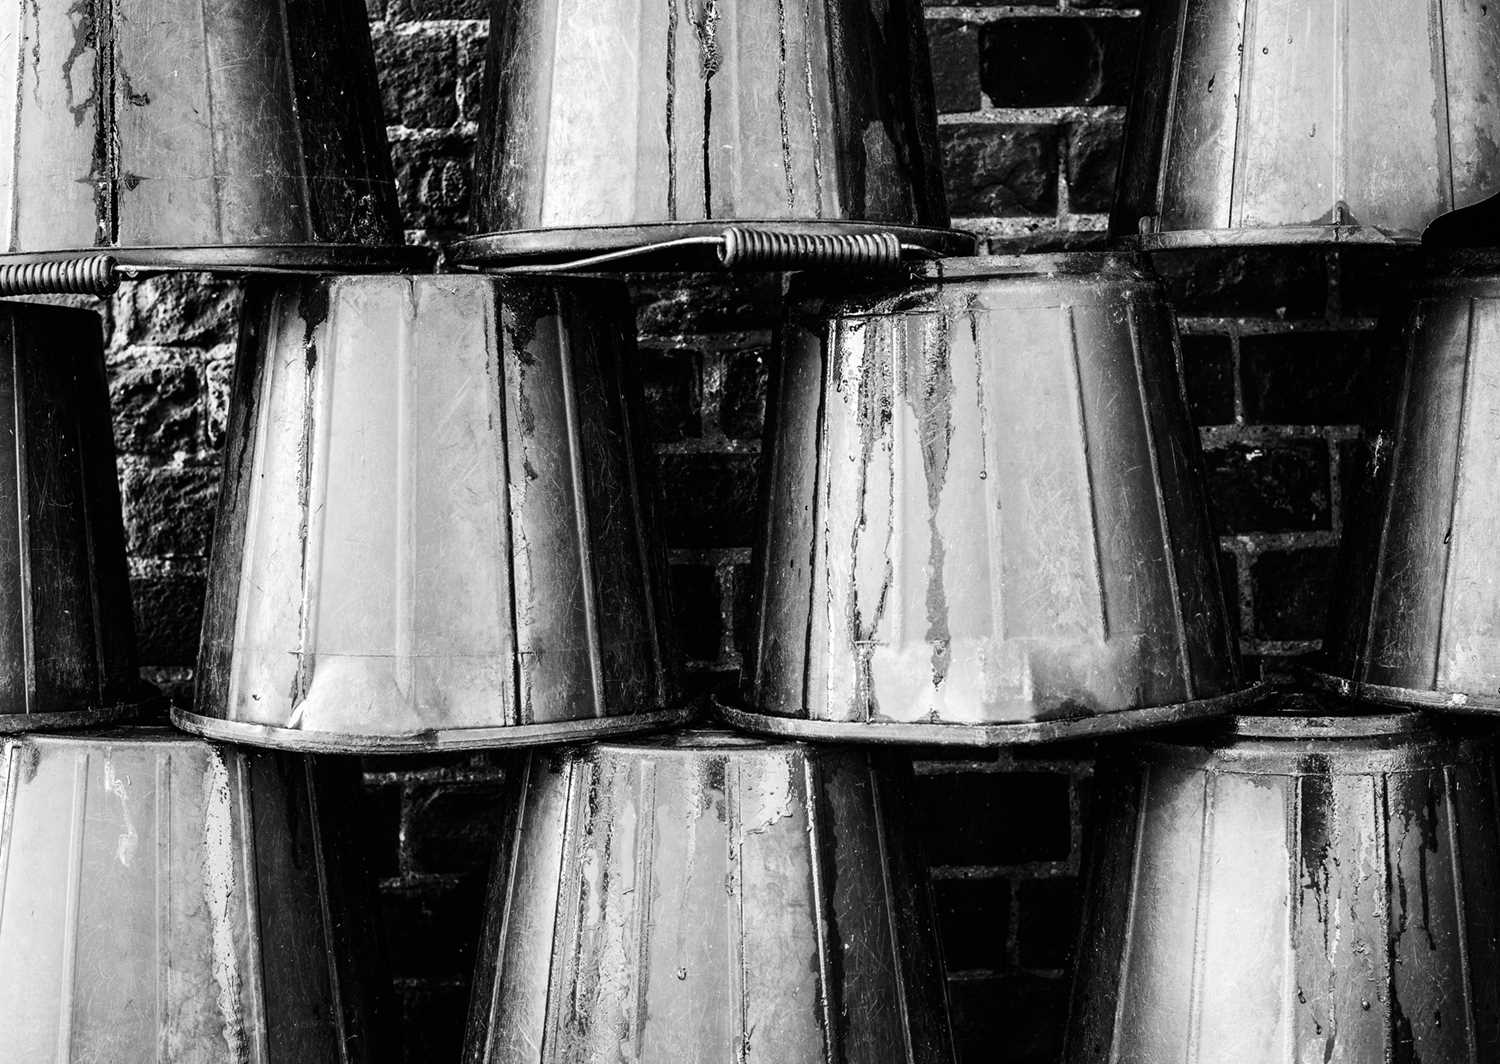 Jayne Odell black and white photographic print, 'Feed buckets', 100cm x 71cm